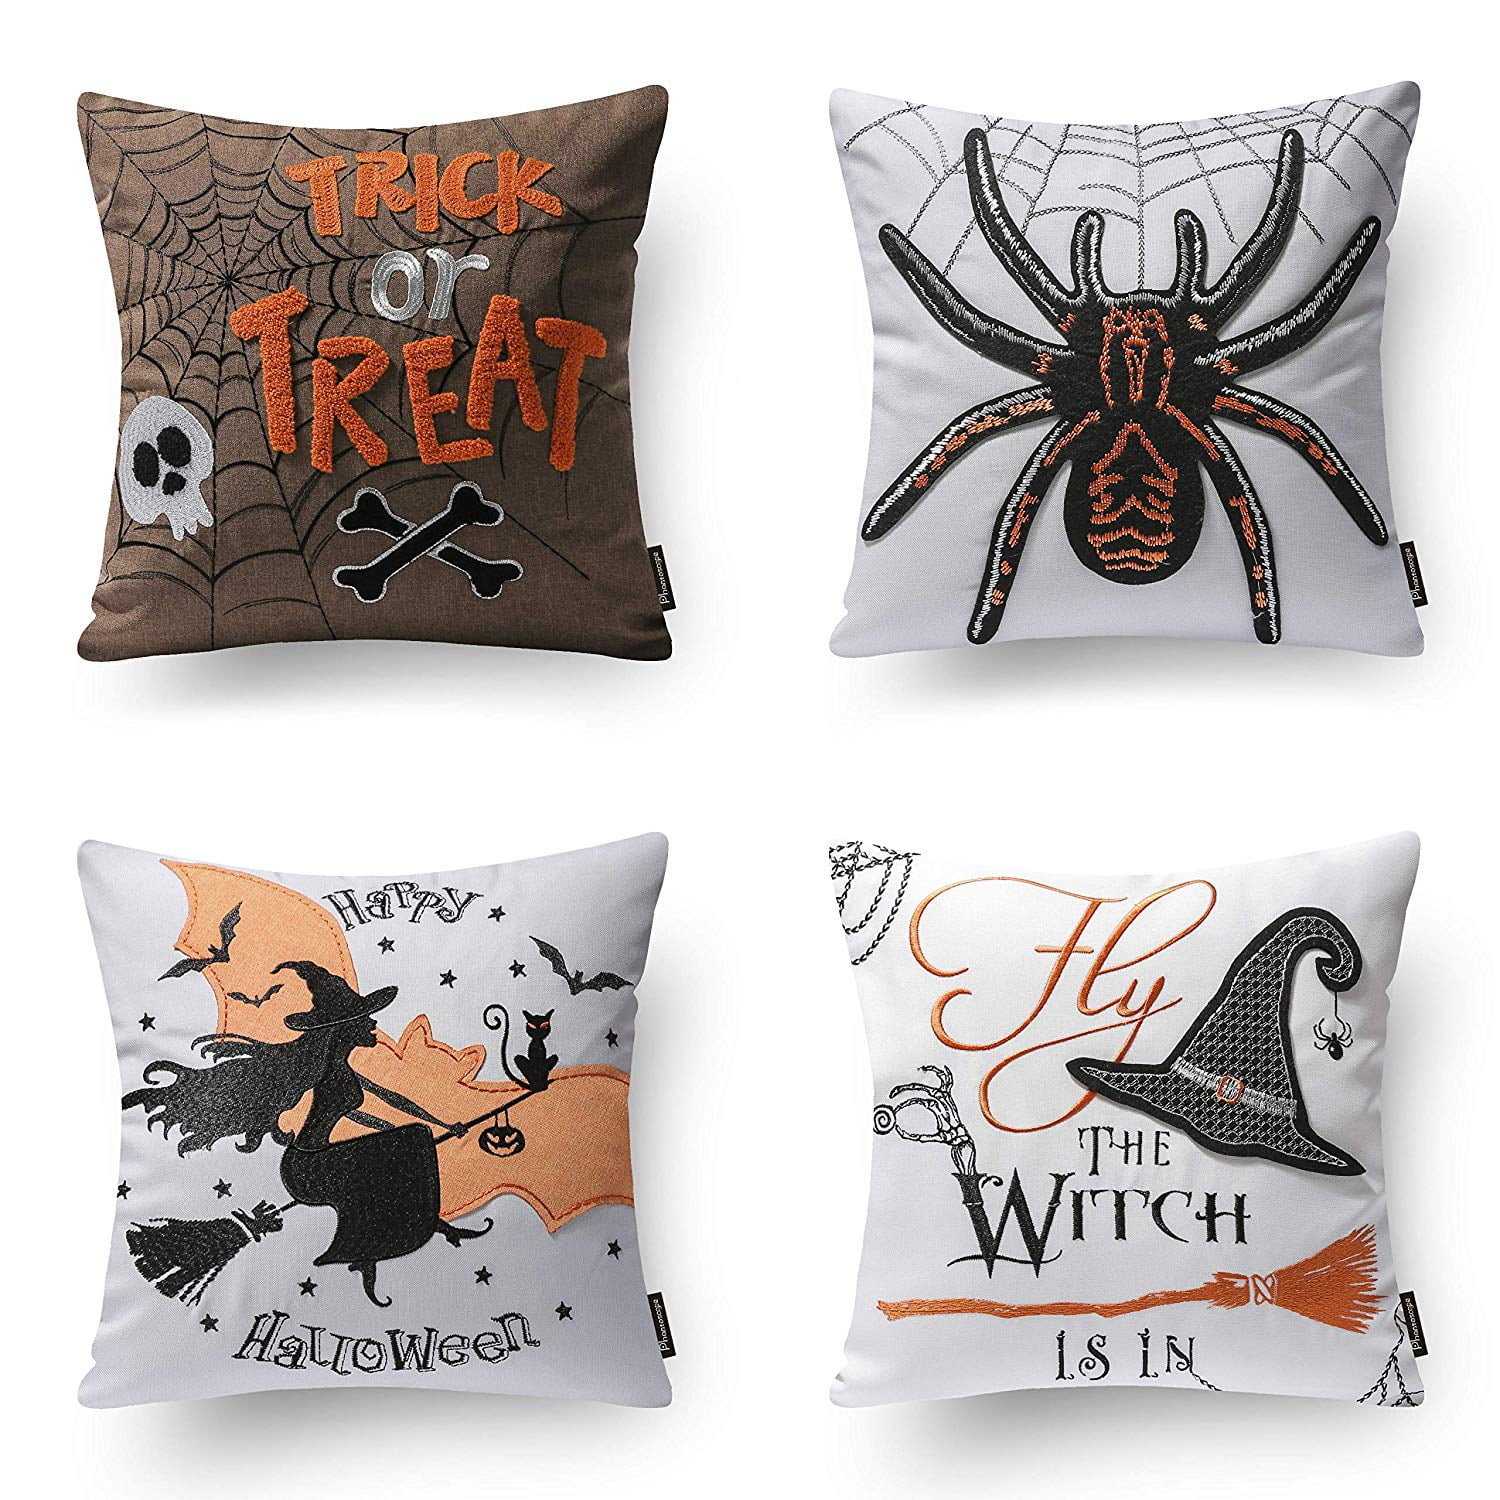 18x18 VepaDesigns Christmas Cloth Scary Dress Gifts Flamingo Boo Grim Reaper Pumpkin Pattern Easy Christmas Gift Throw Pillow Multicolor